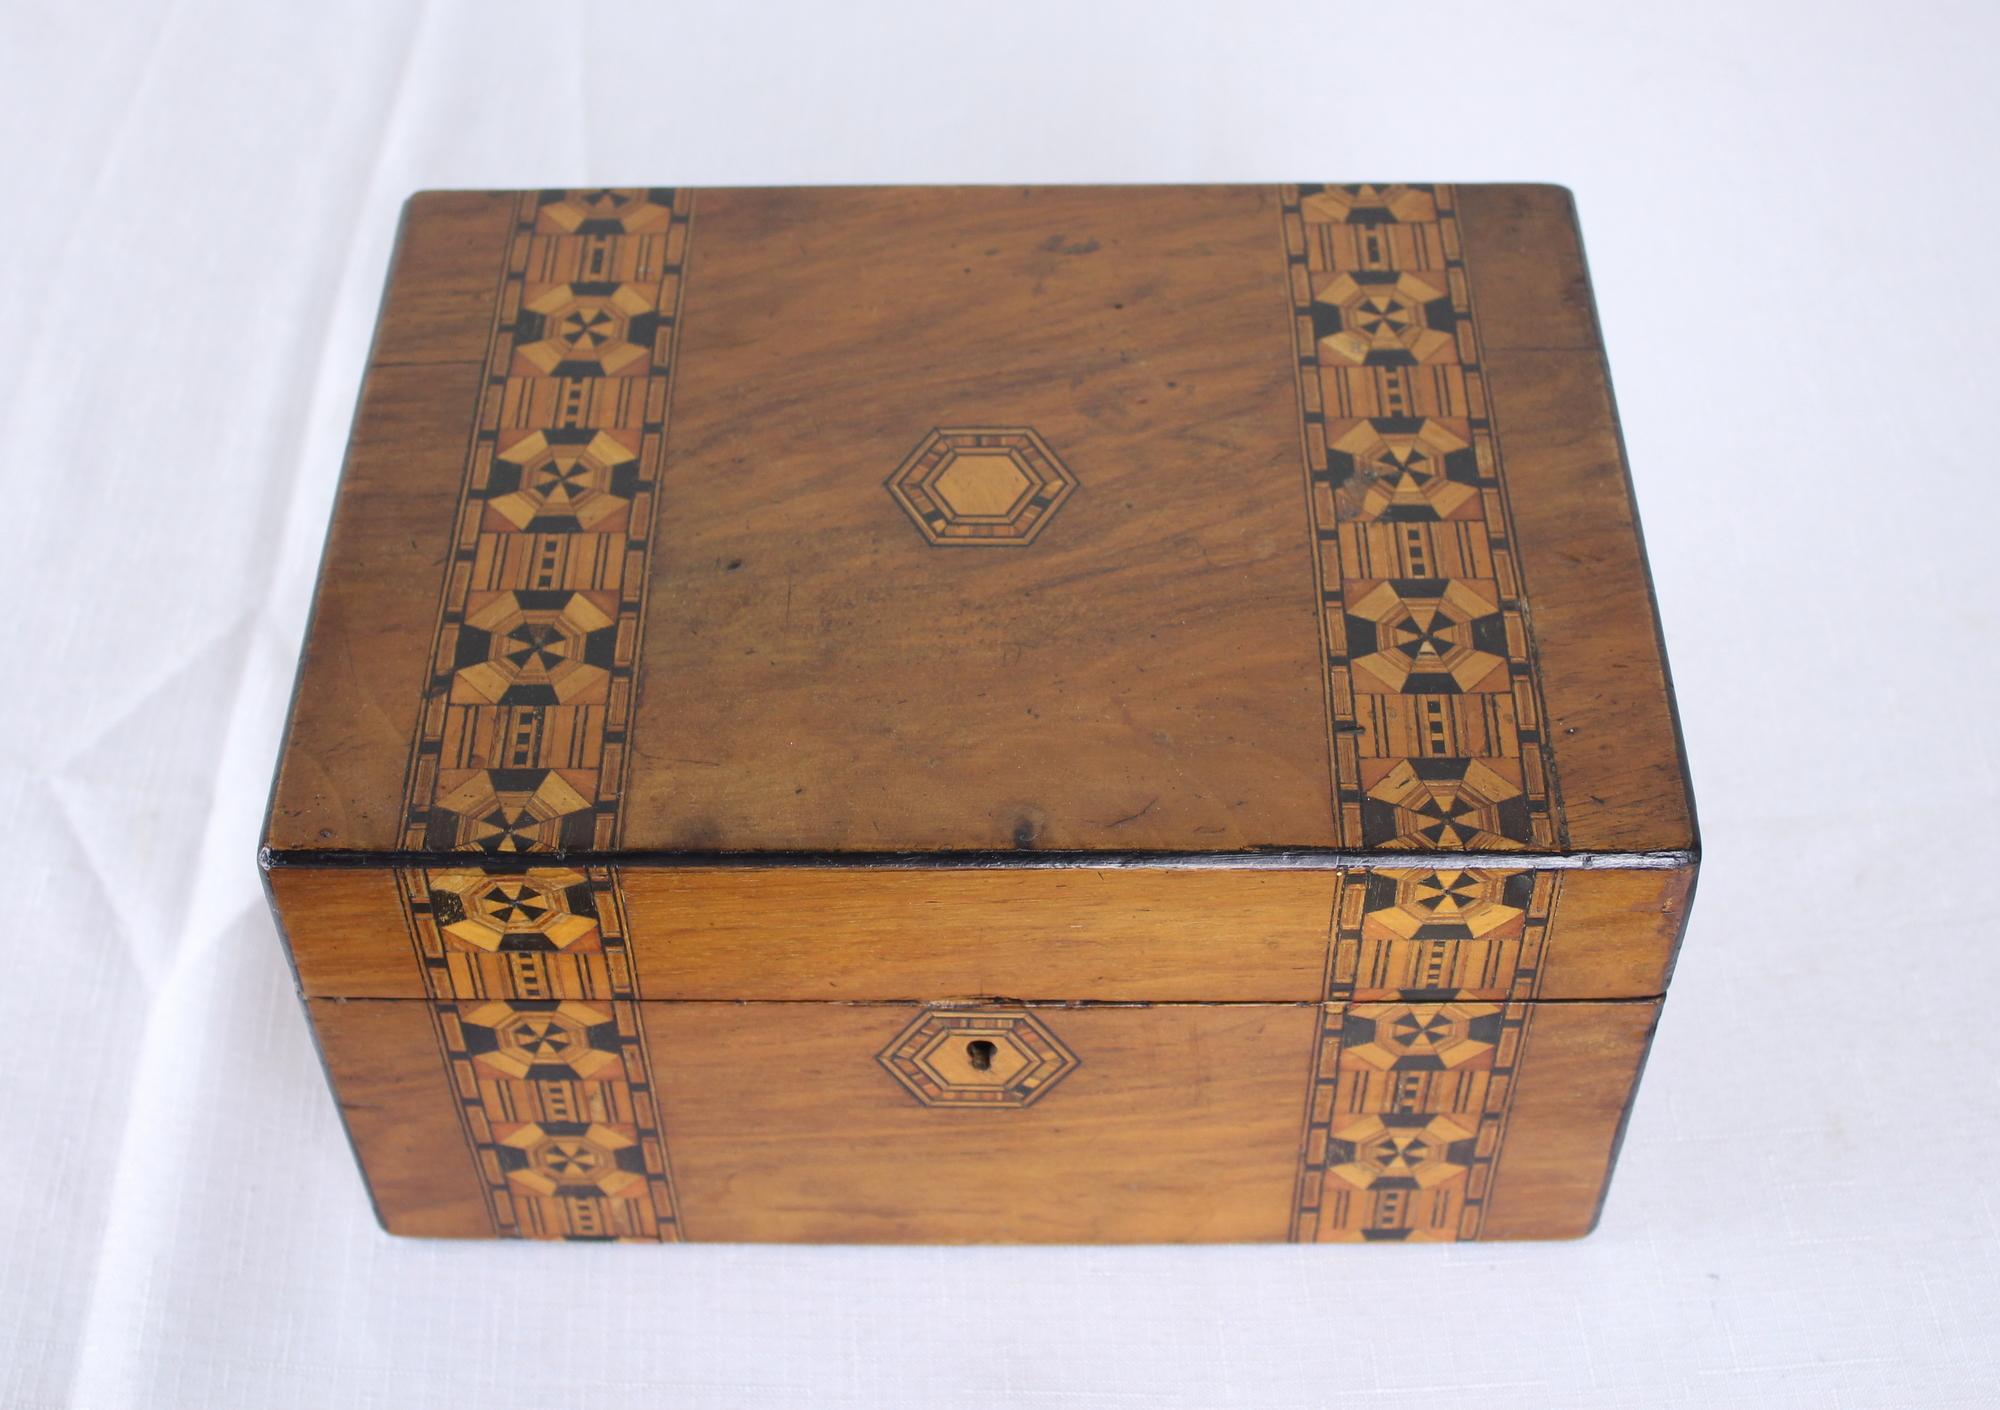 A decorative walnut Tumbridgeware box. Tumbridgeware being characterized as a form of decoratively inlaid woodwork, typically in the form of boxes, that is characteristic of Tonbridge and the spa town of Royal Tunbridge Wells in Kent in the 18th and